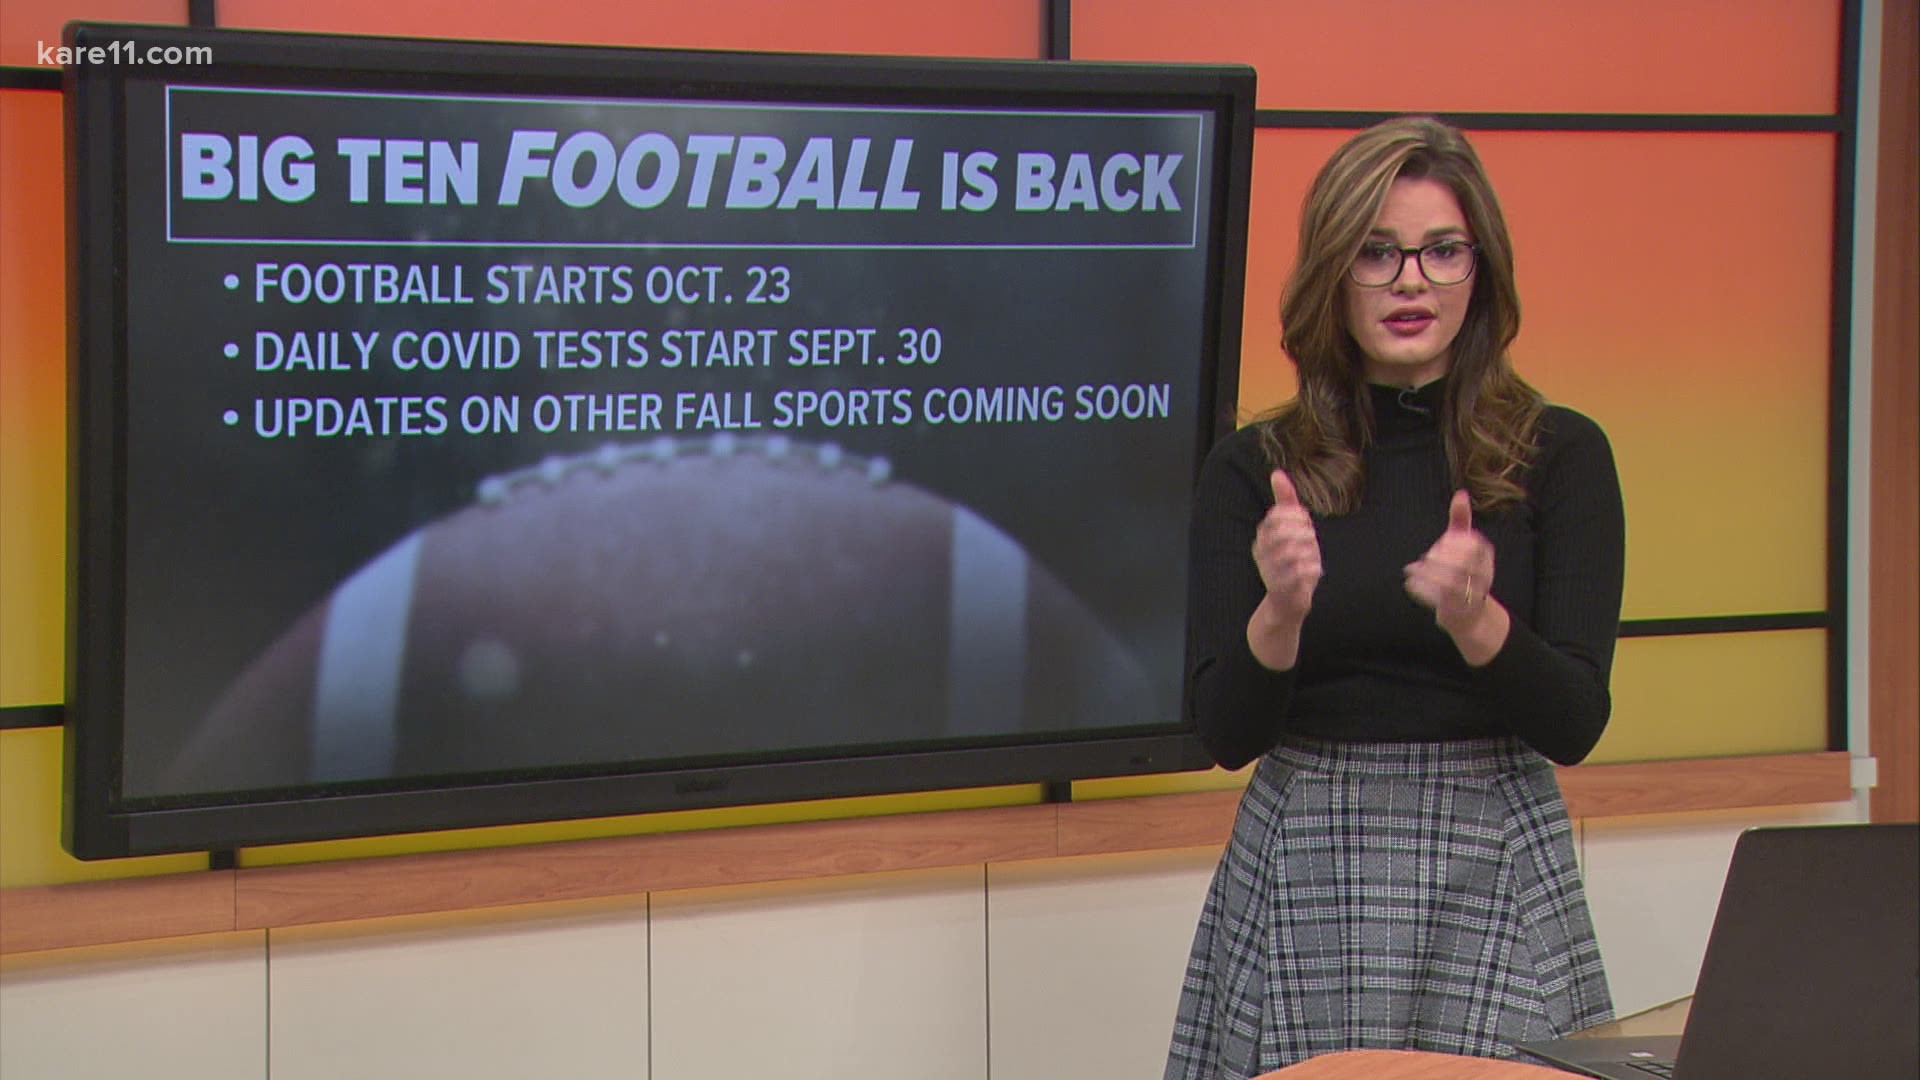 After canceling the season, football is back